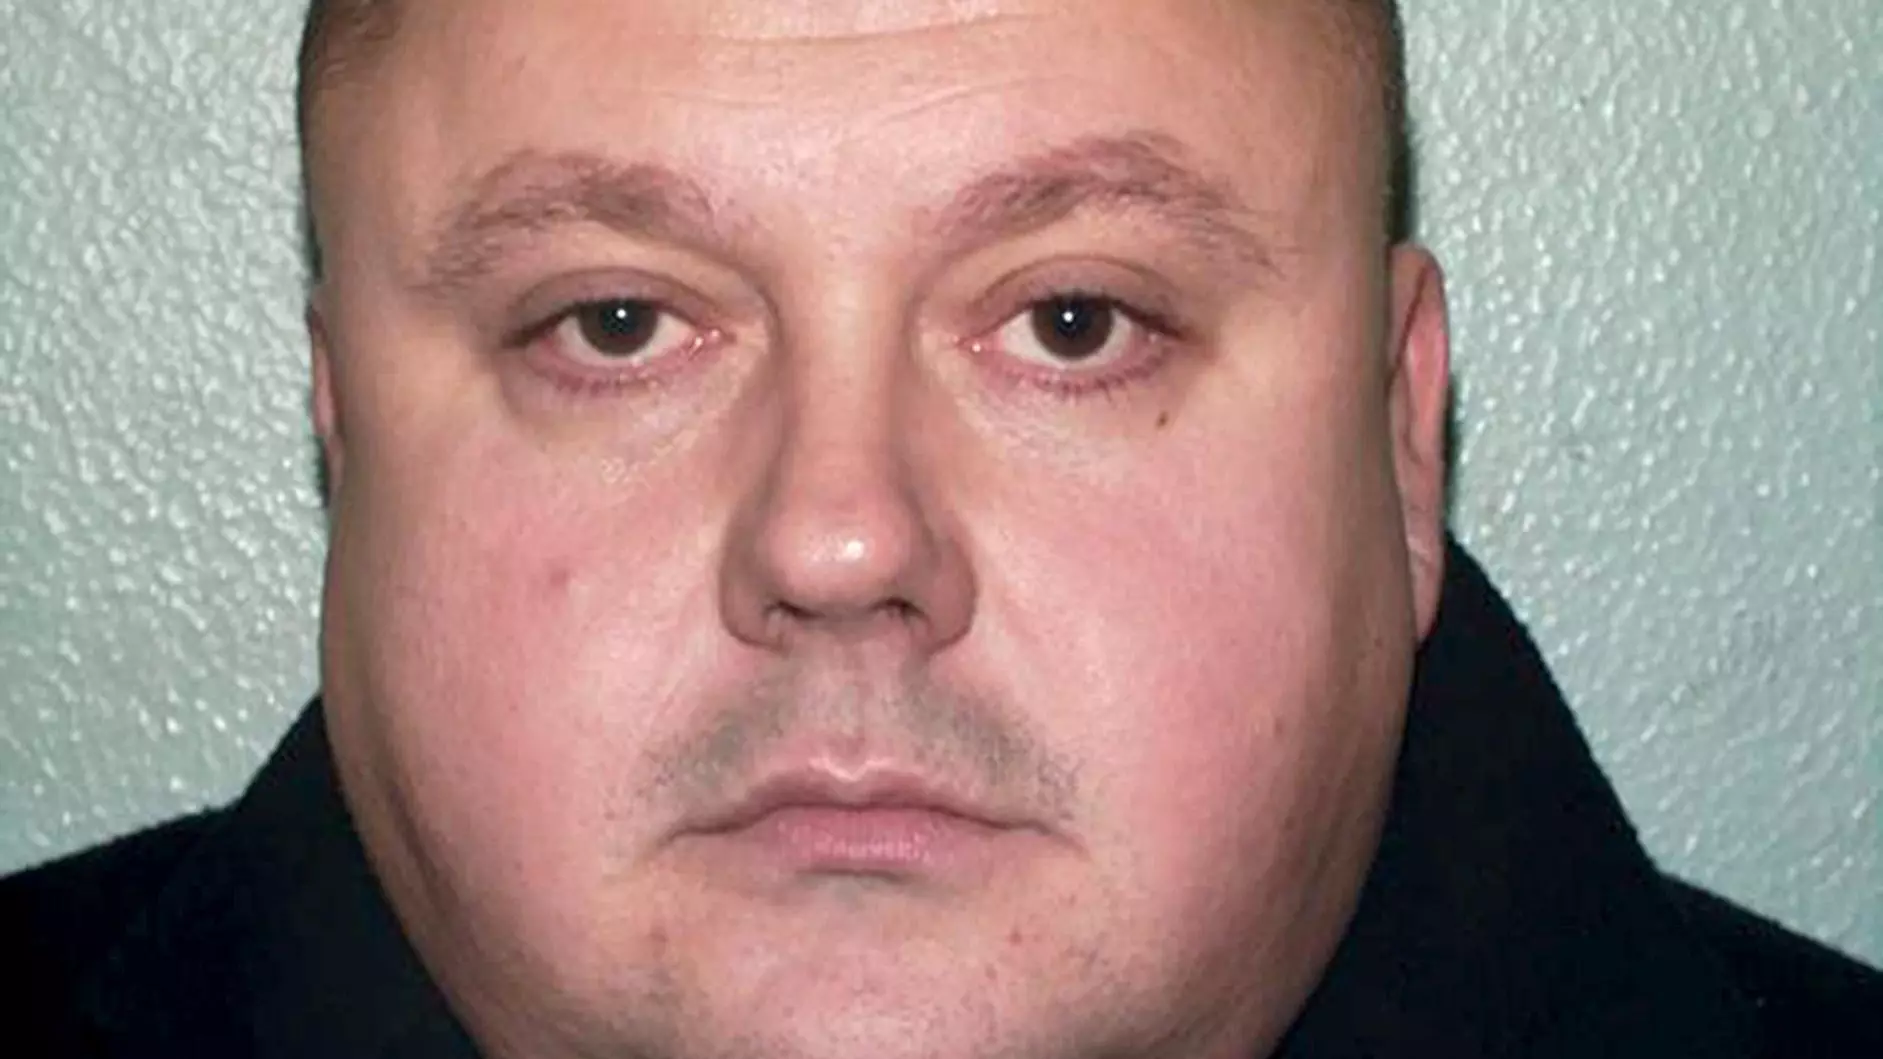 Serial Killer Levi Bellfield Says Holly Willoughby And Isabel Oakeshott Are 'His Type' In Prison Letter 